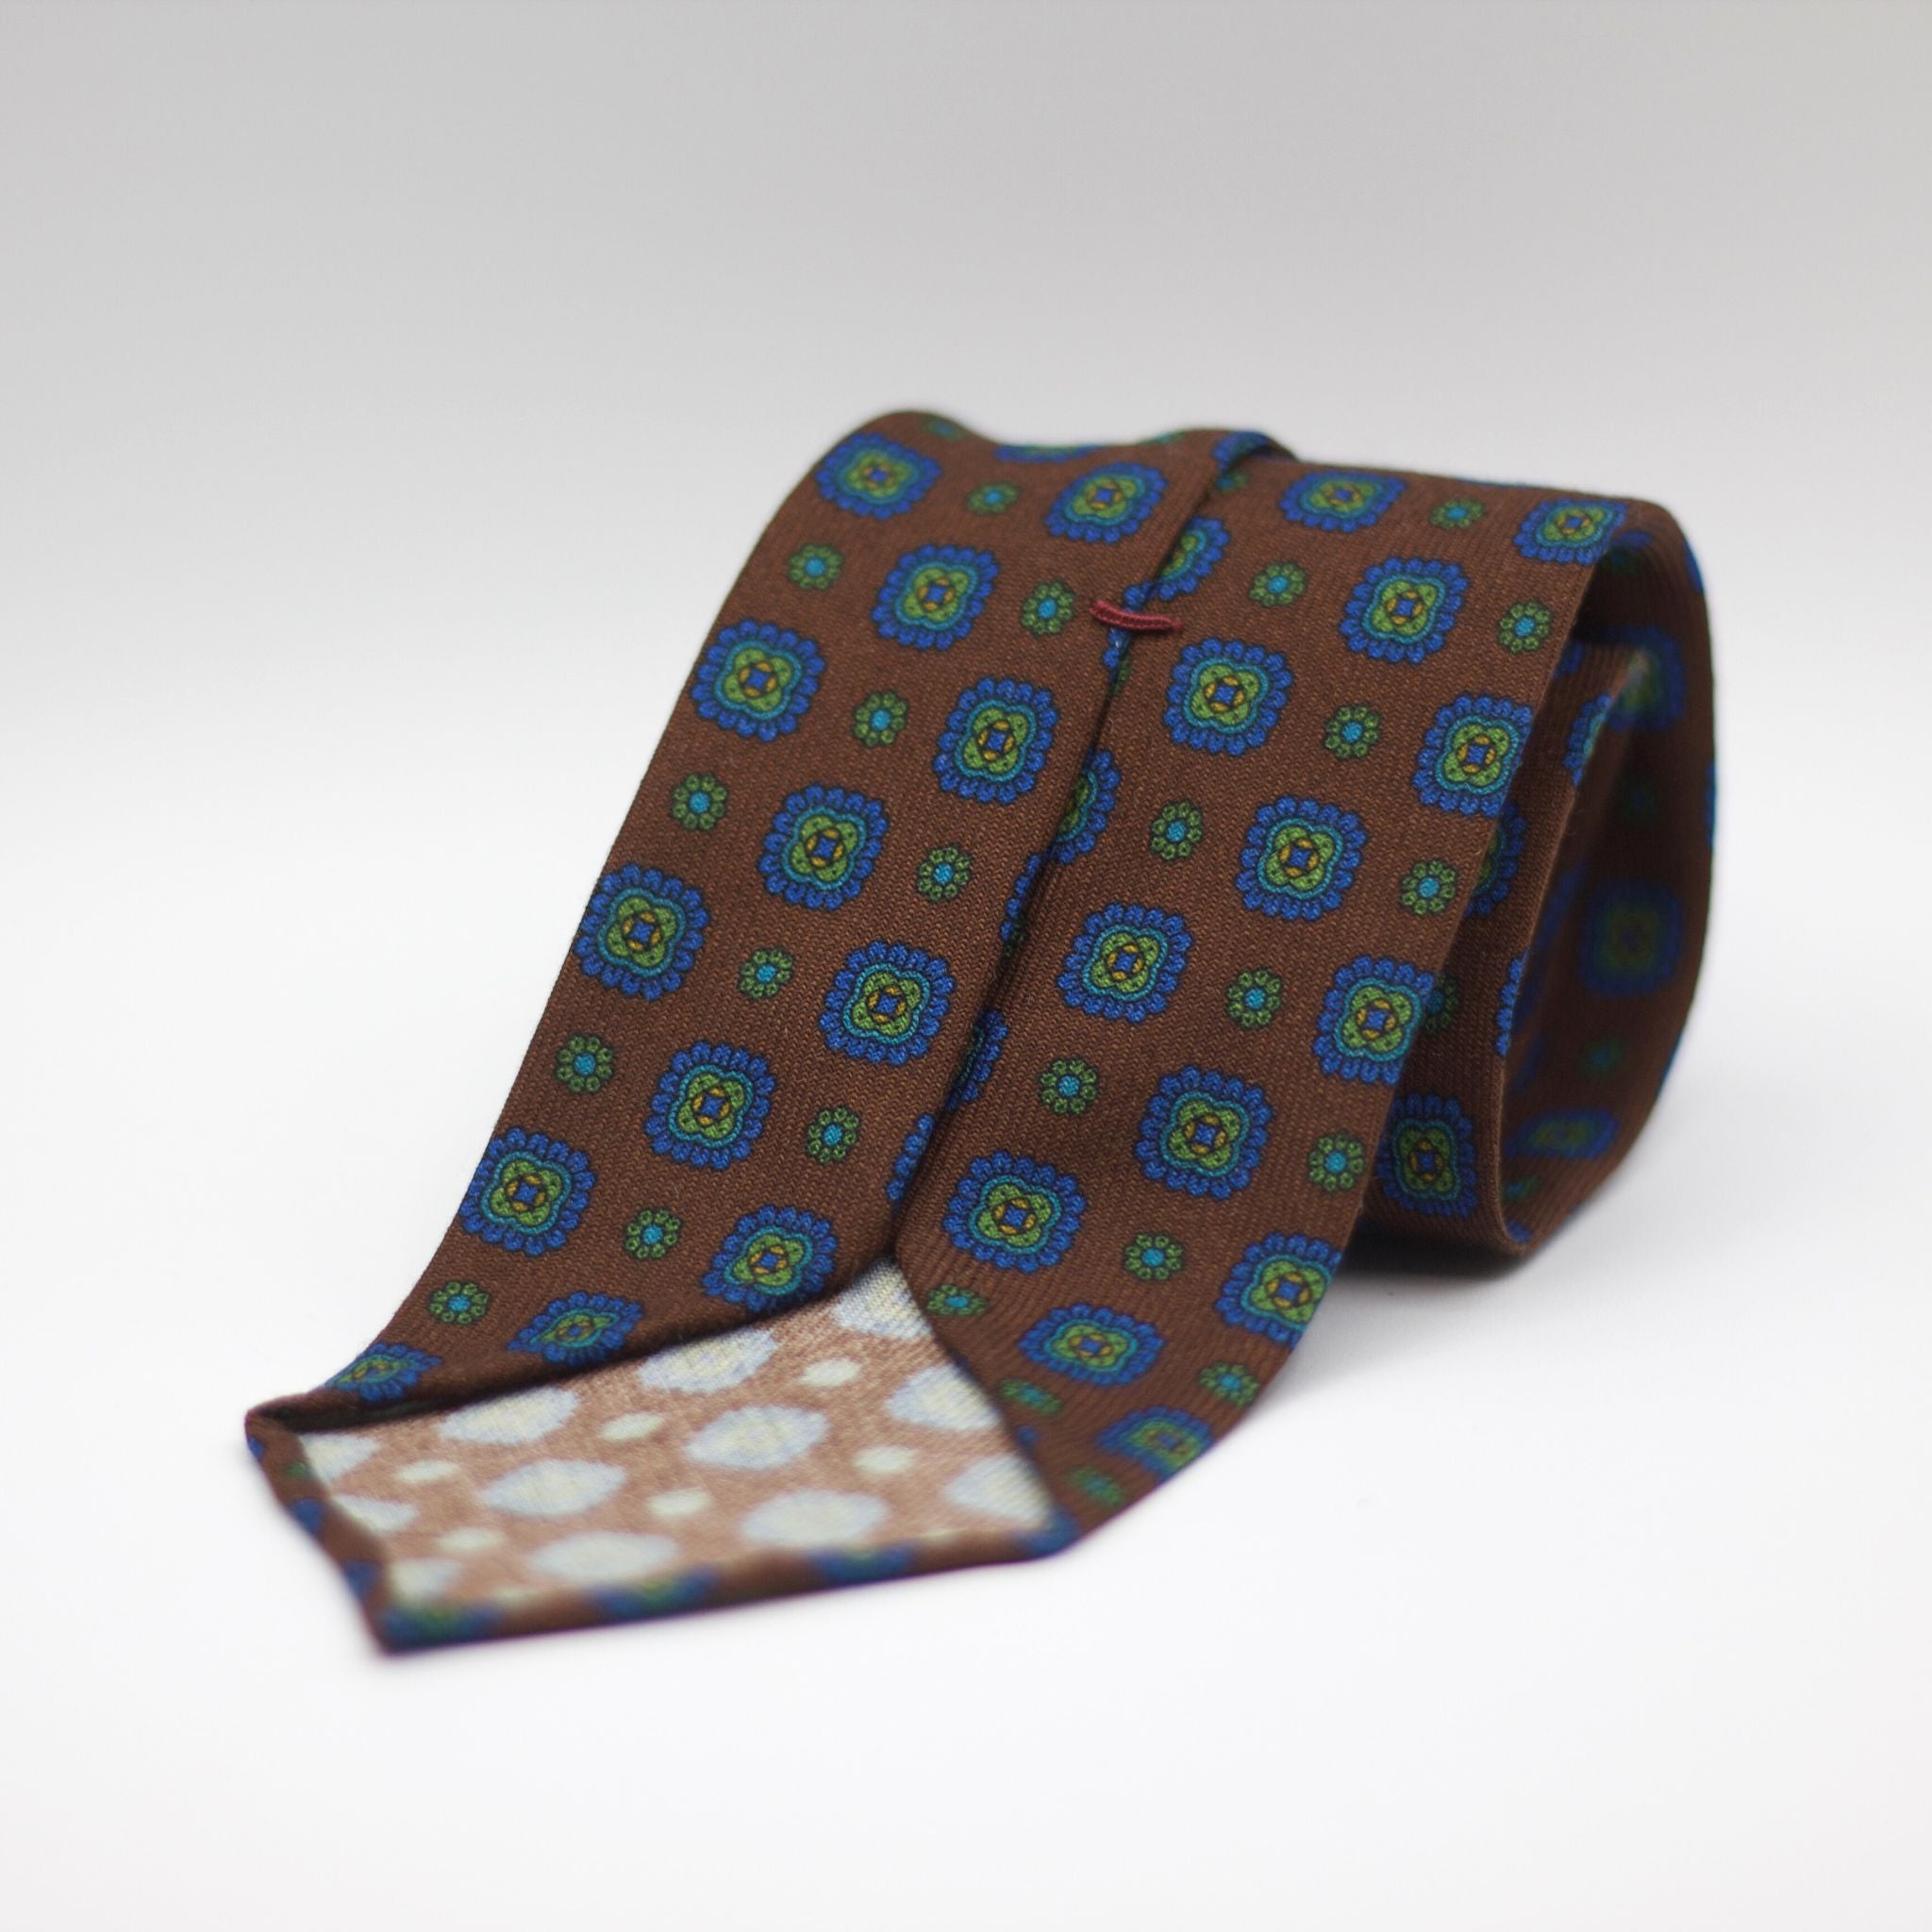 Cruciani & Bella 100%  Printed Wool  Unlined Hand rolled blades Brown, Green, Blue and Yellow  Motif Tie Handmade in Italy 8 cm x 150 cm